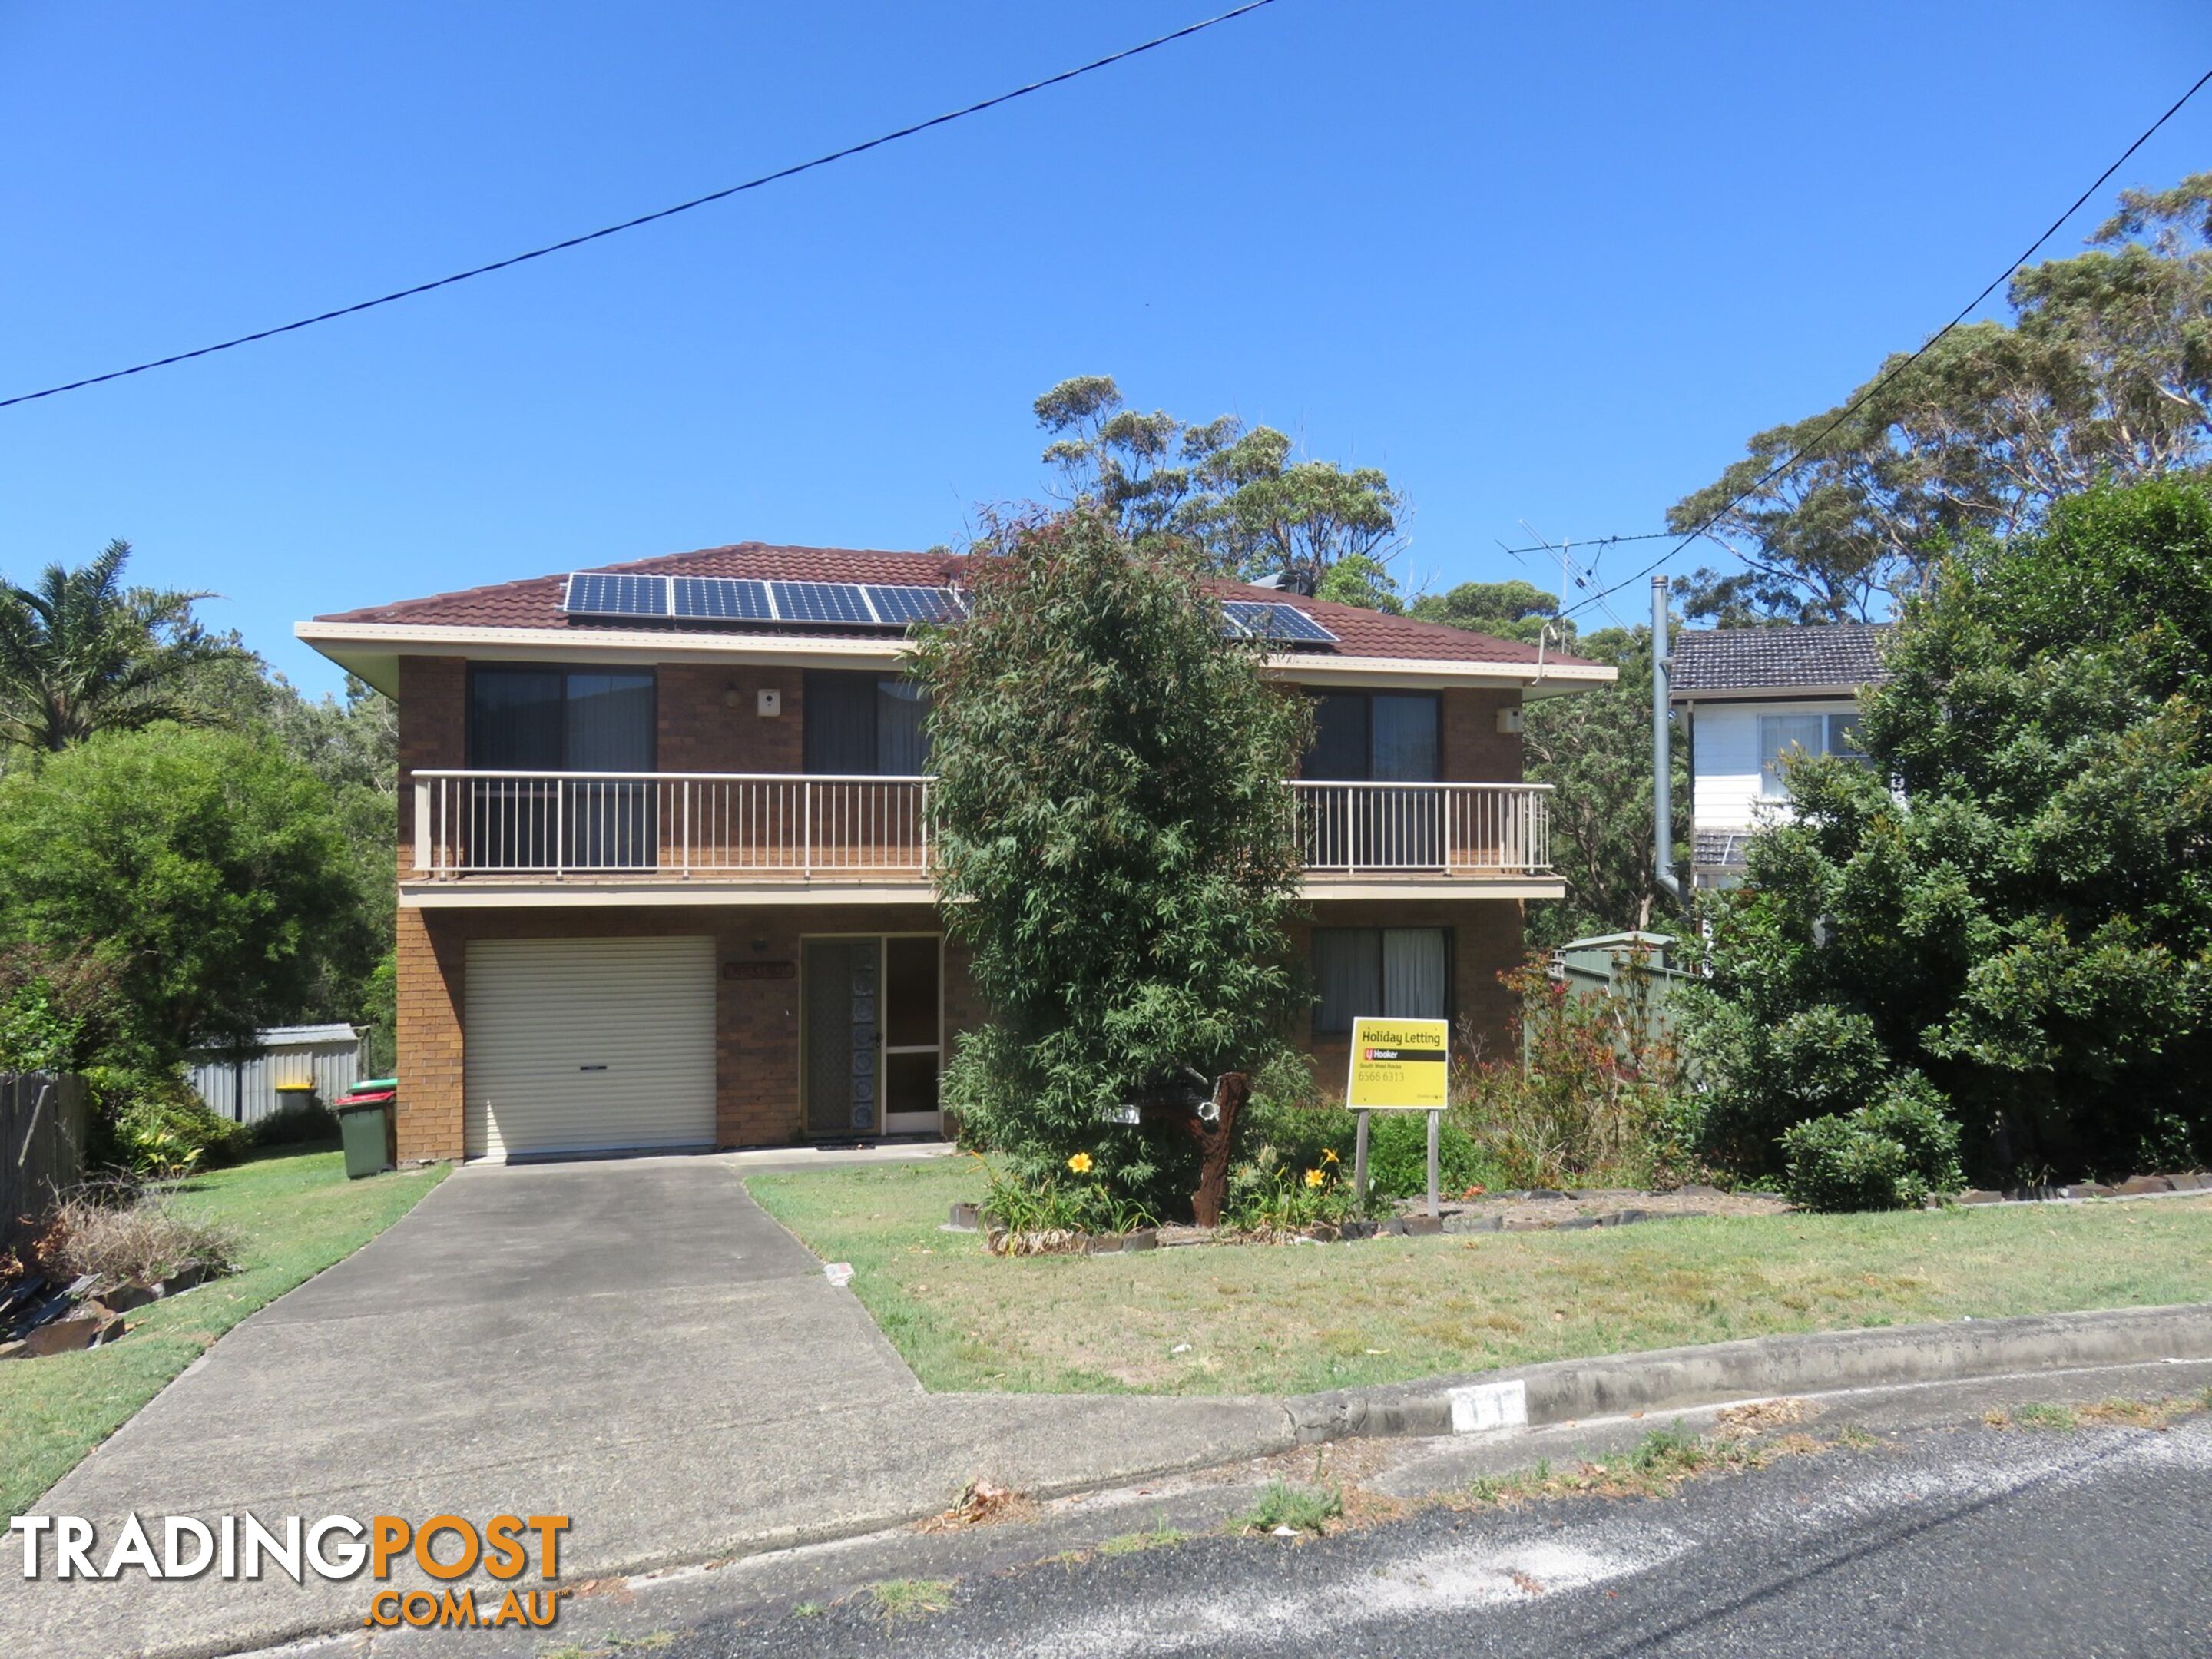 11 Currawong Street SOUTH WEST ROCKS NSW 2431